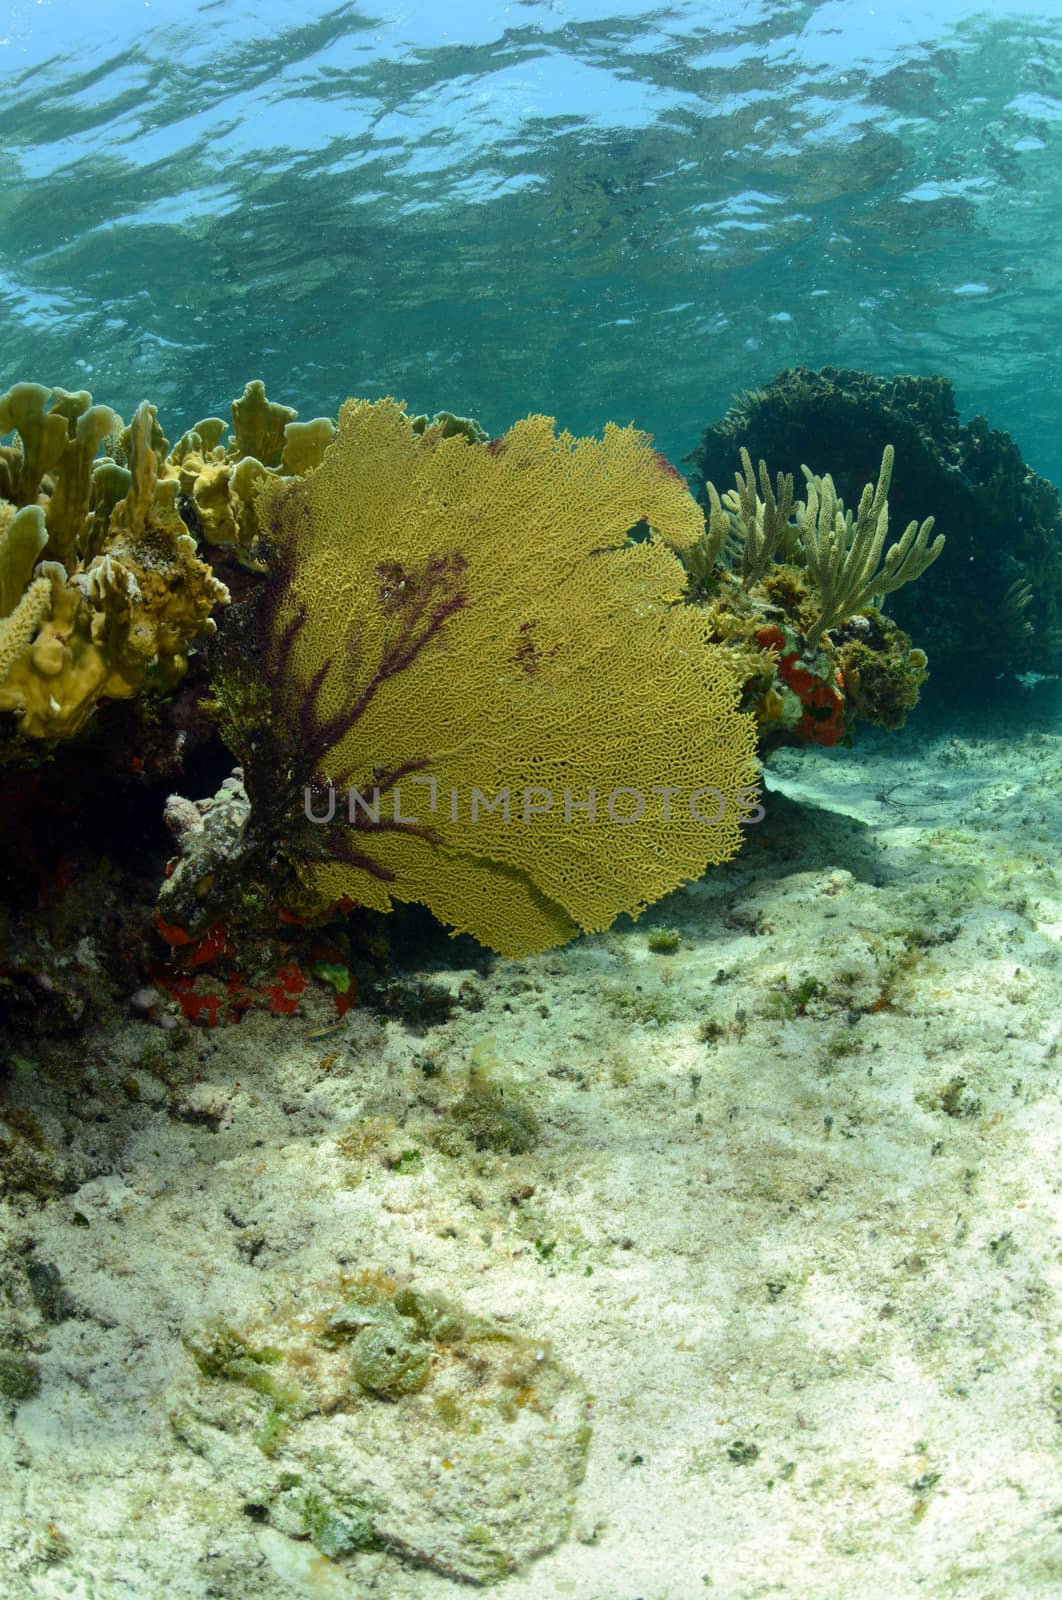 Vibrant sea fan and coral in natural underwater seascape in Caribbean